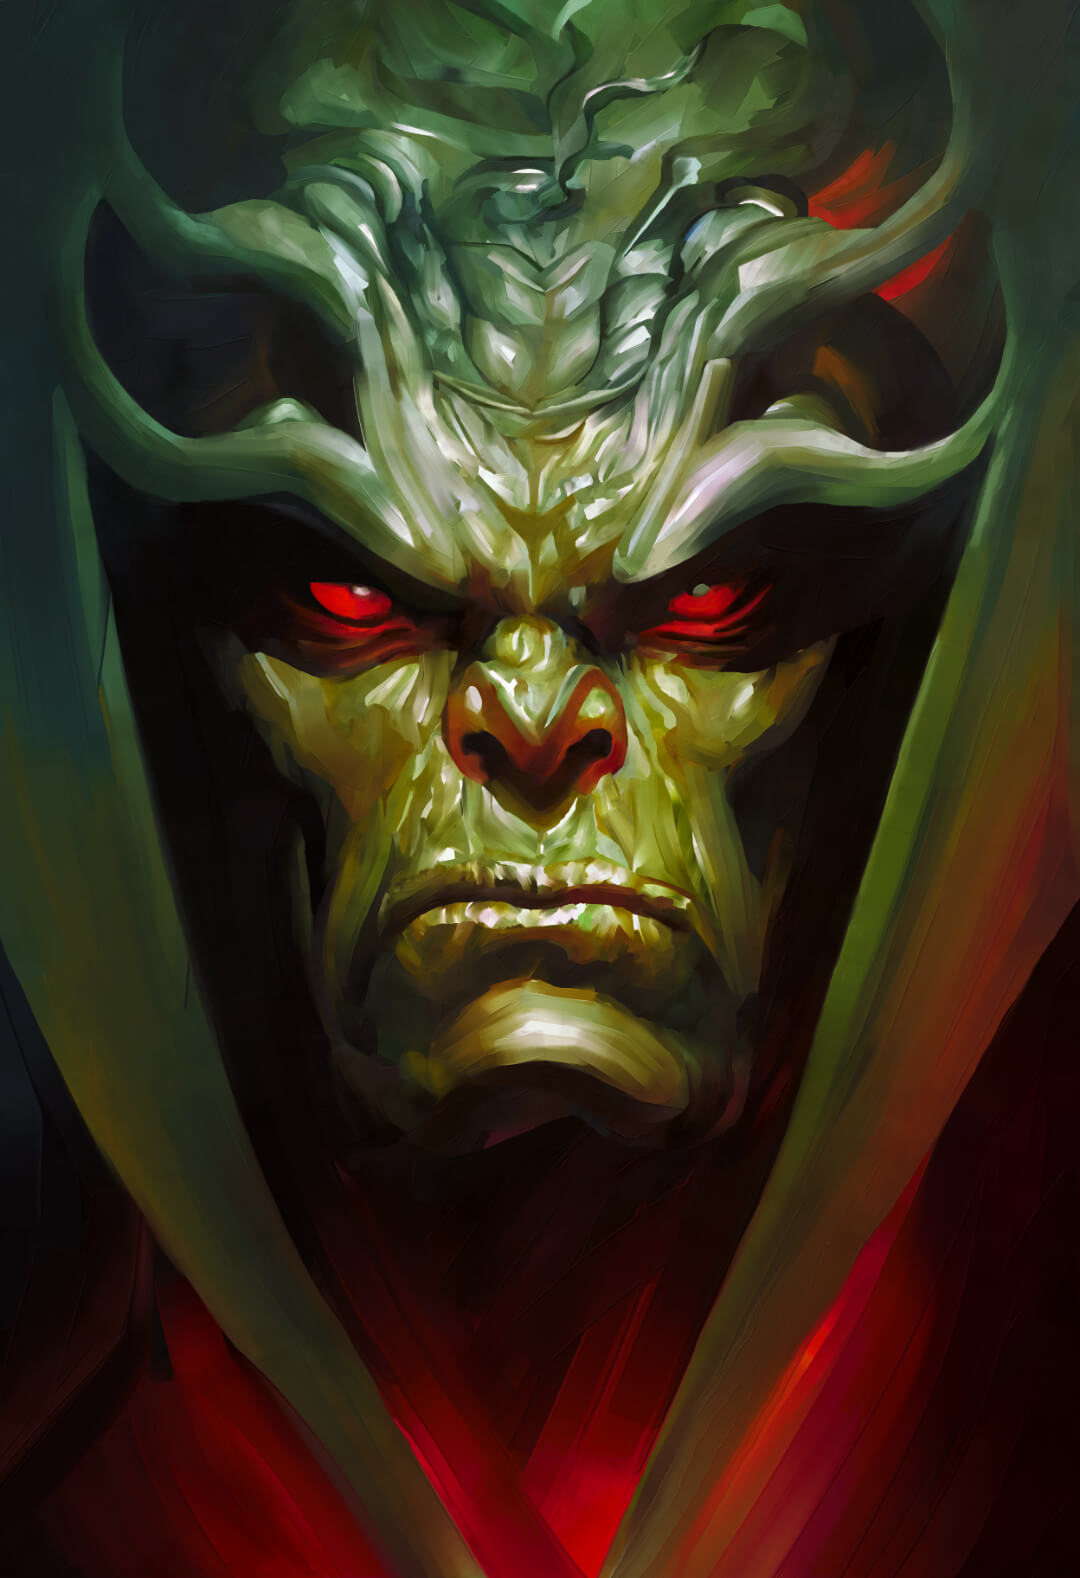 Portrait of a reptilian-looking deity with rubbery green skin and glowing red eyes.